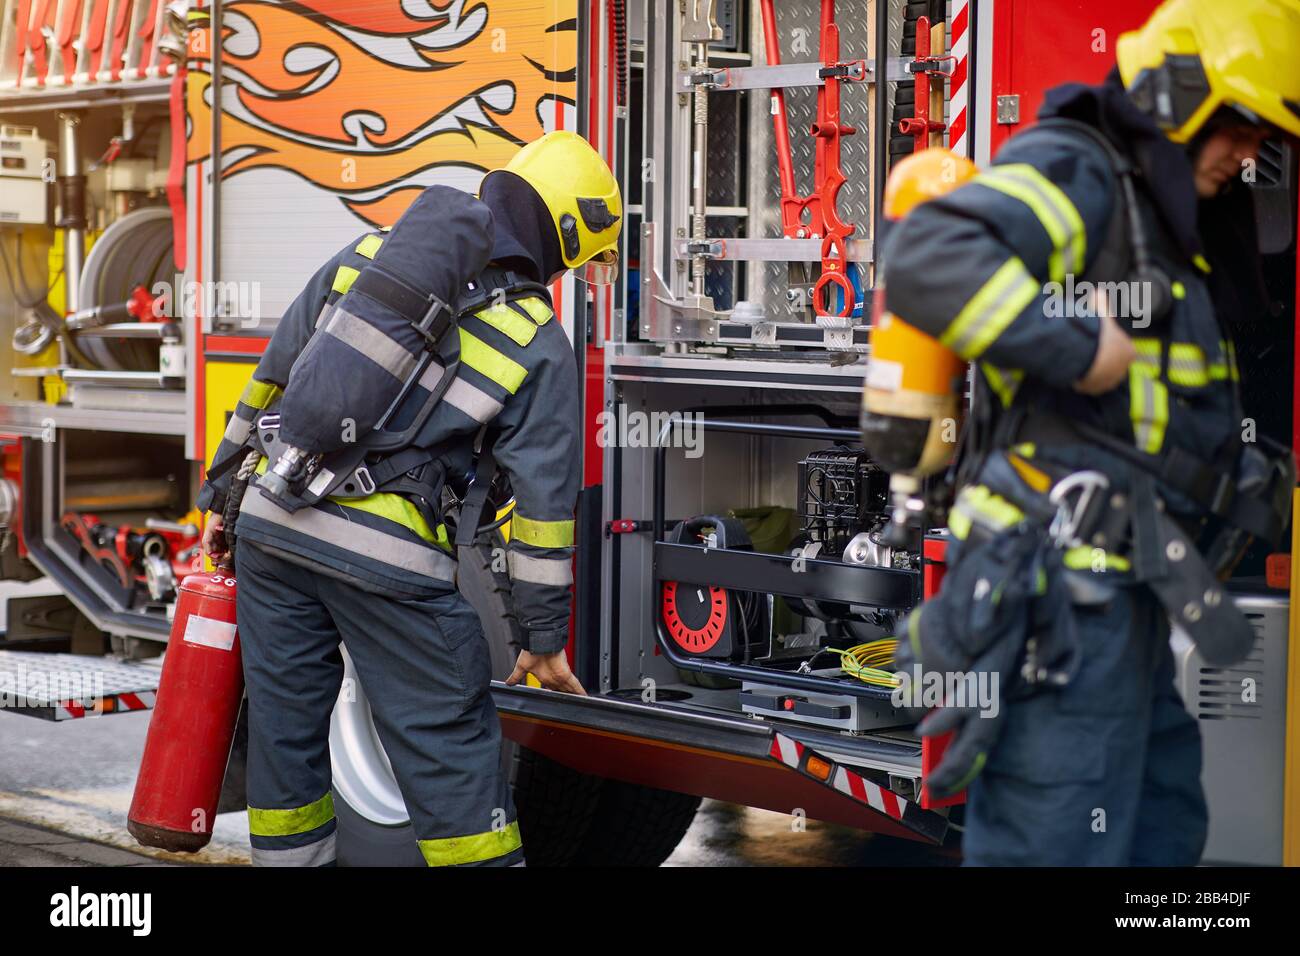 Fireman in uniform in front of fire truck going to rescue and protect. Emergancy , danger, servise concept. Stock Photo